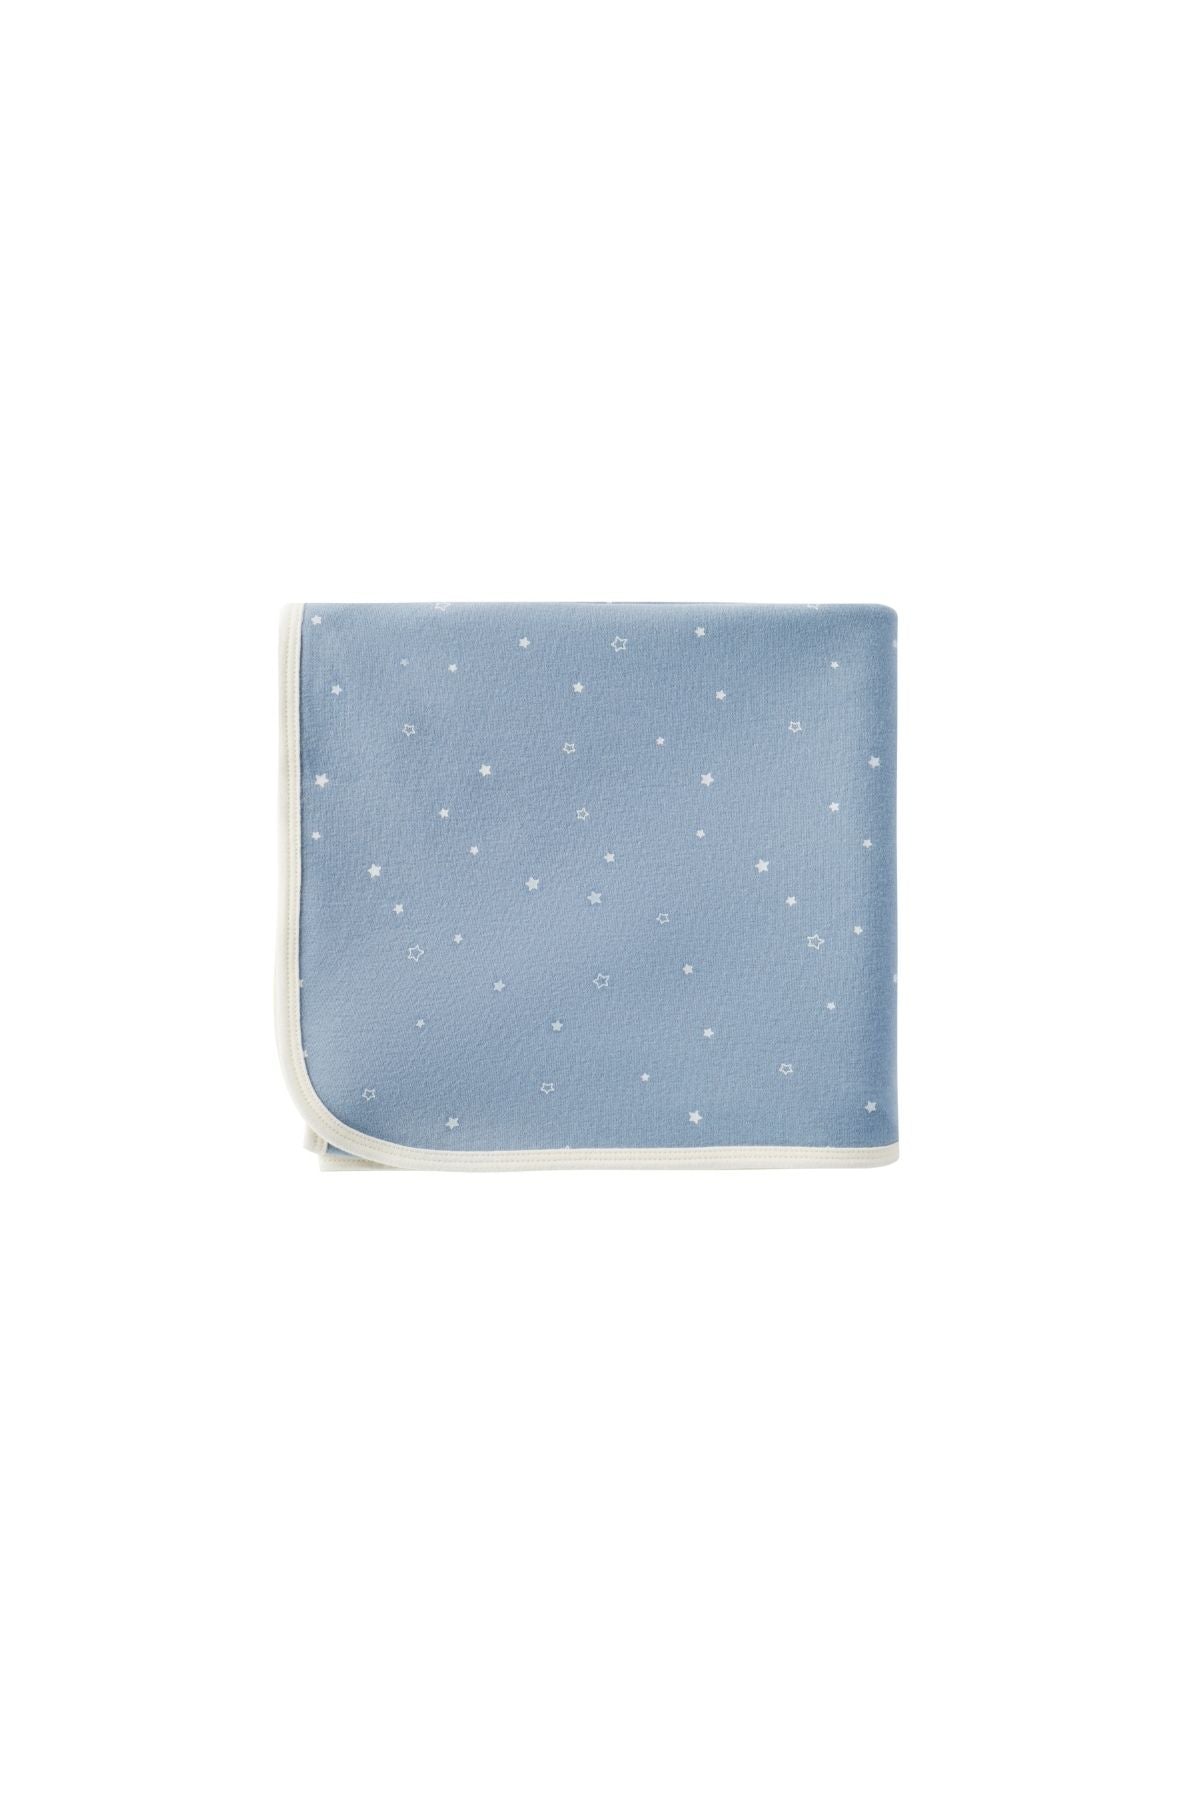 image for Organic Cotton Swaddle Blanket-Blue Starry